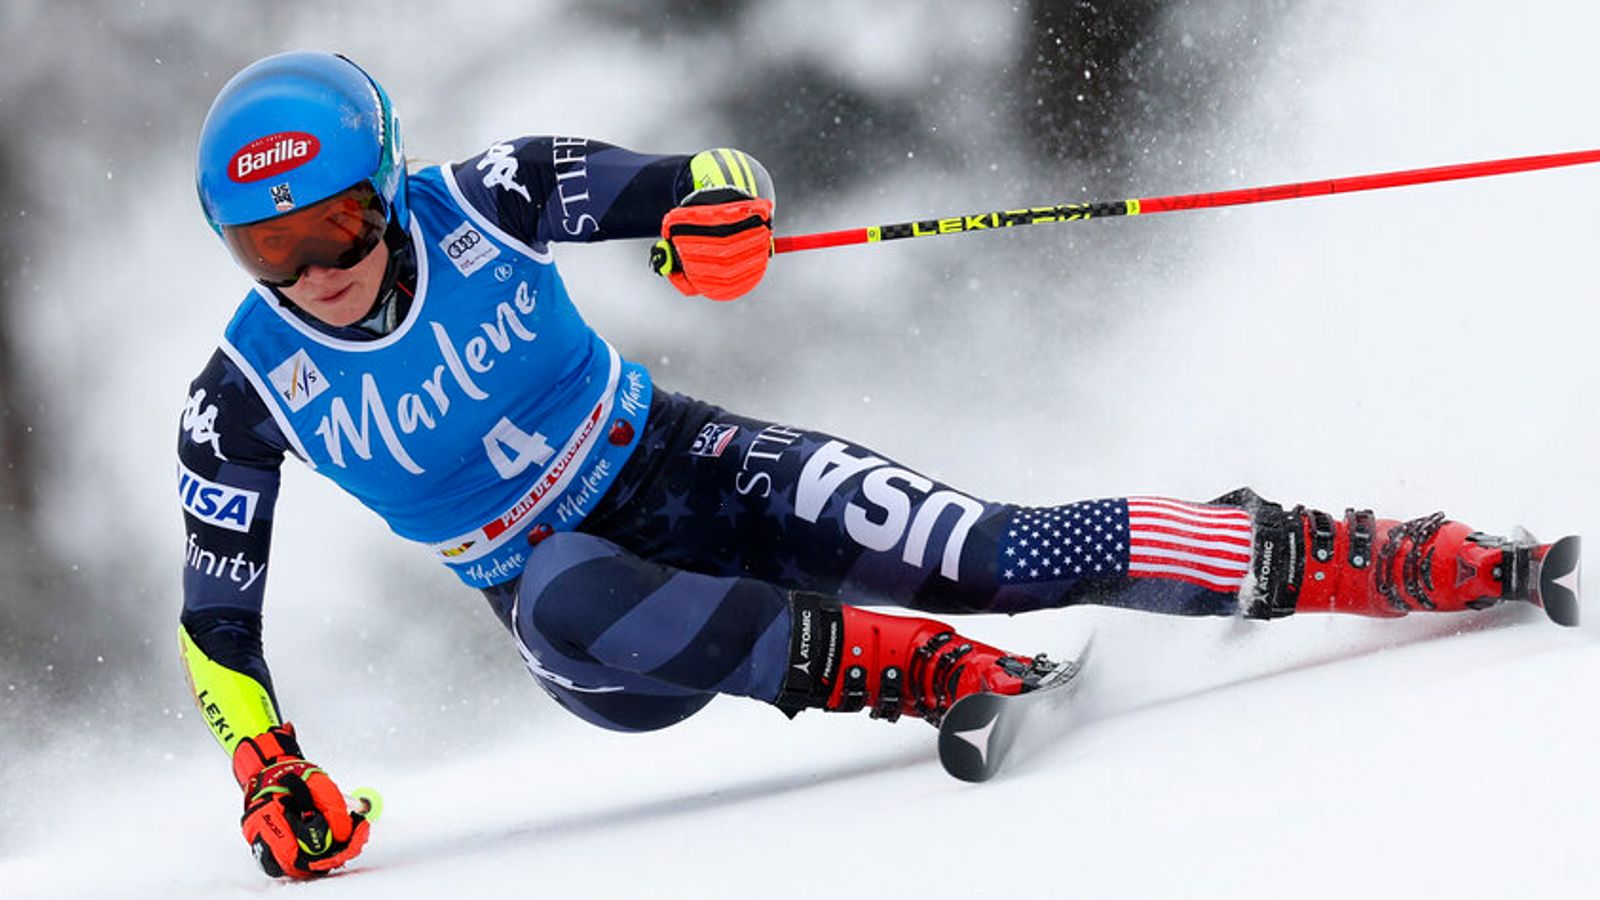 Mikaela Shiffrin claims record 83rd women’s World Cup victory to eclipse fellow American Lindsey Vonn